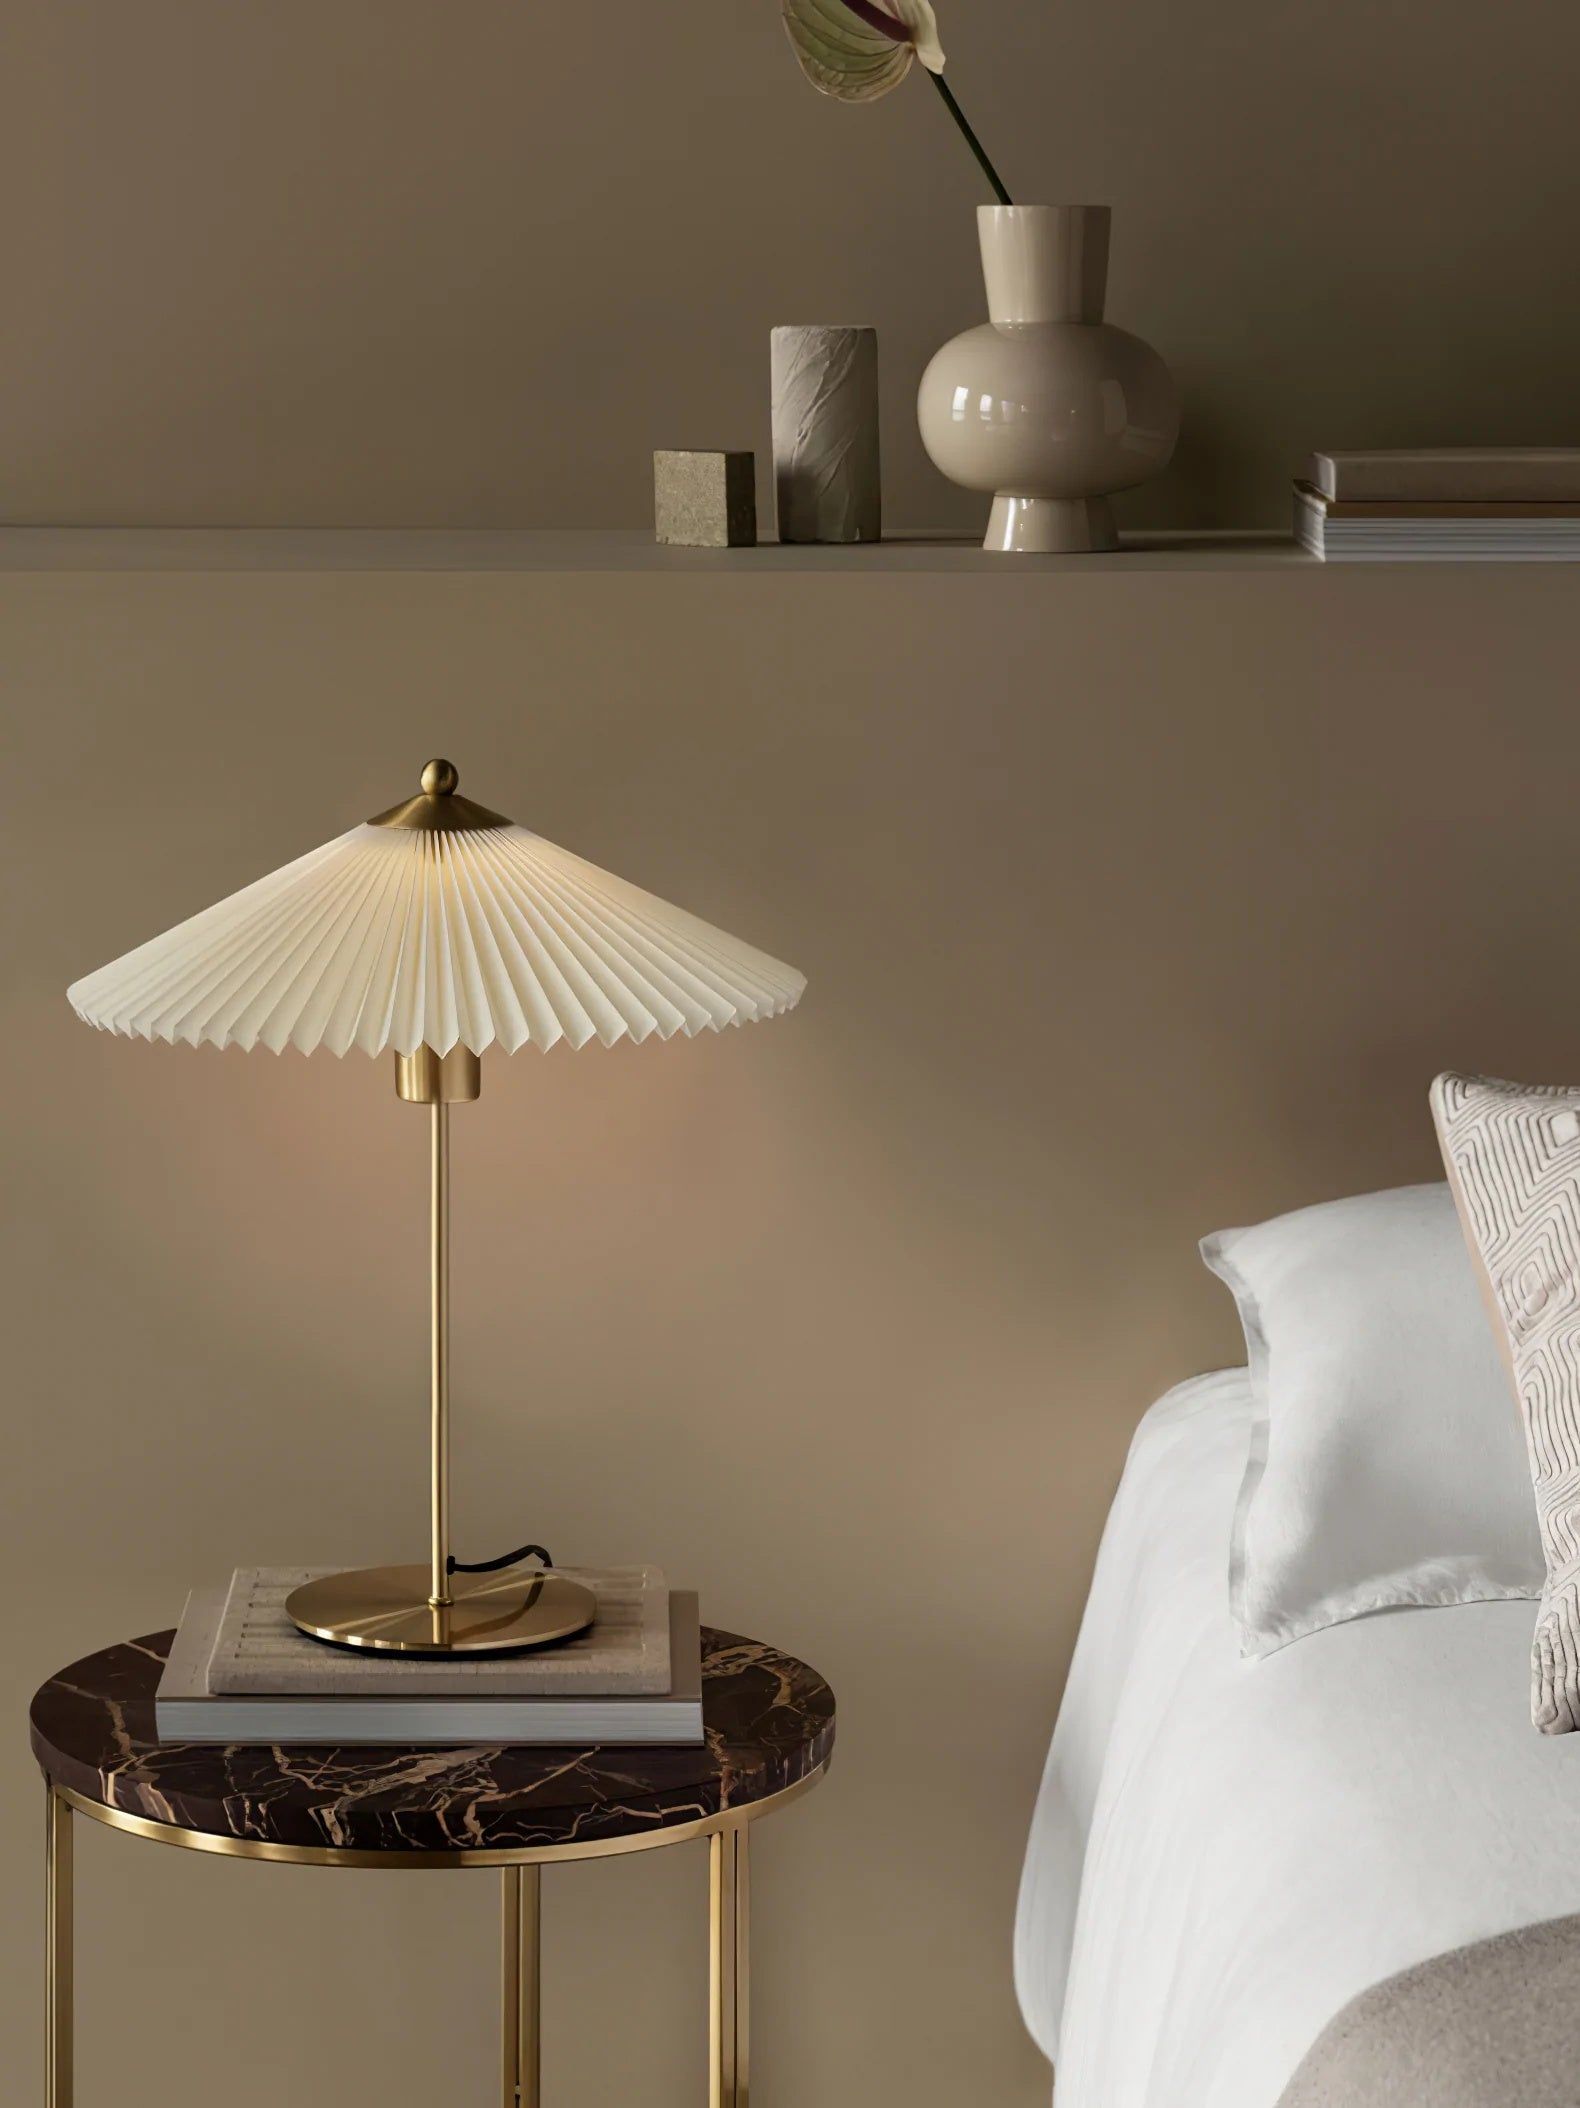 Bedside Table With Lamps The Perfect Lighting Solution for Your Bedroom Decor